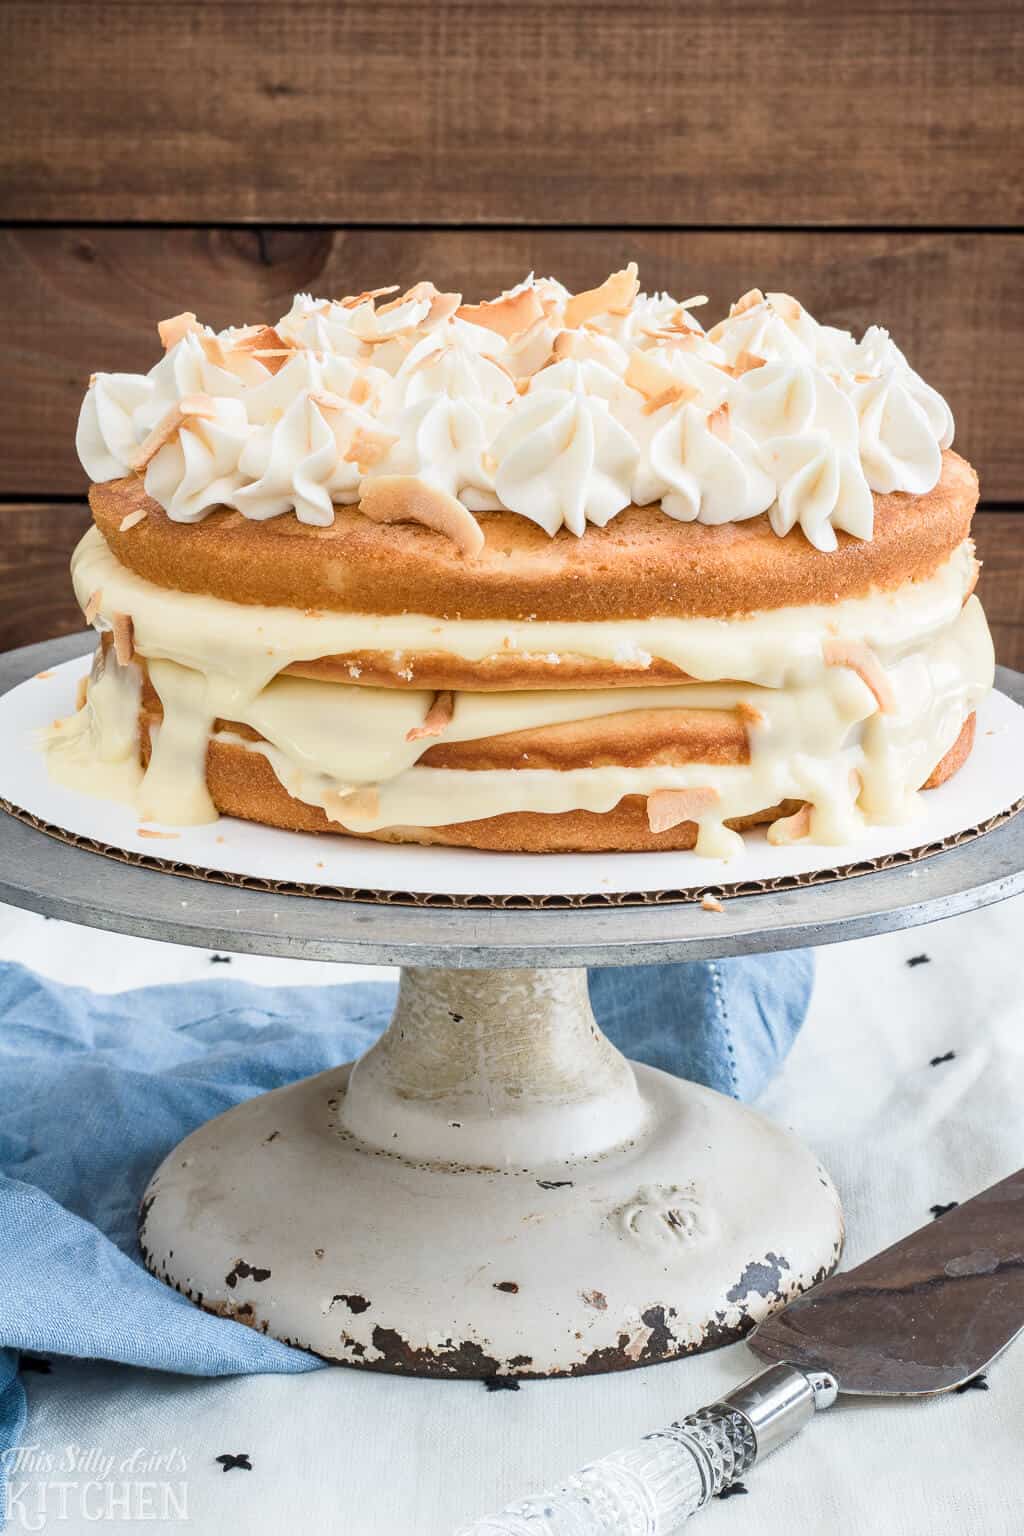 Naked Coconut Cake, layers of white cake, coconut pudding and coconut frosting, all topped with toasted coconut and caramel sauce! #Recipe from ThisSillyGirlsKitchen.com #coconut #coconutcake #cake #nakedcake